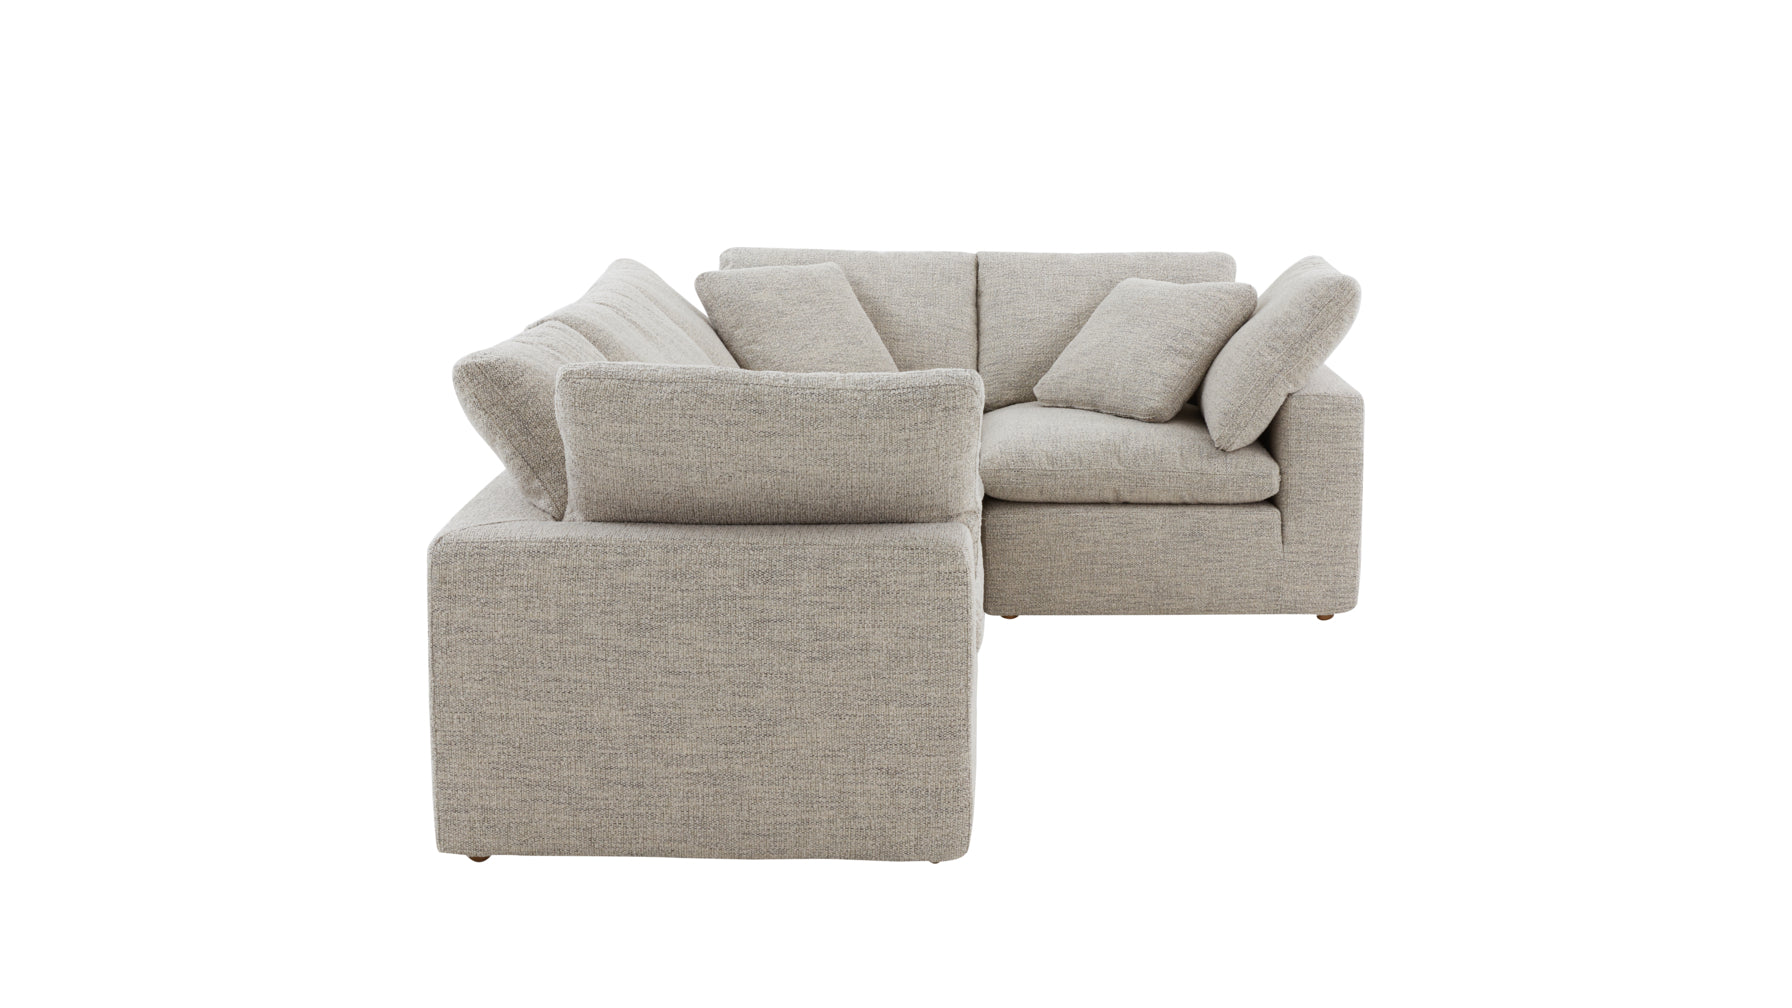 Movie Night™ 4-Piece Modular Sectional Closed, Standard, Oatmeal - Image 7